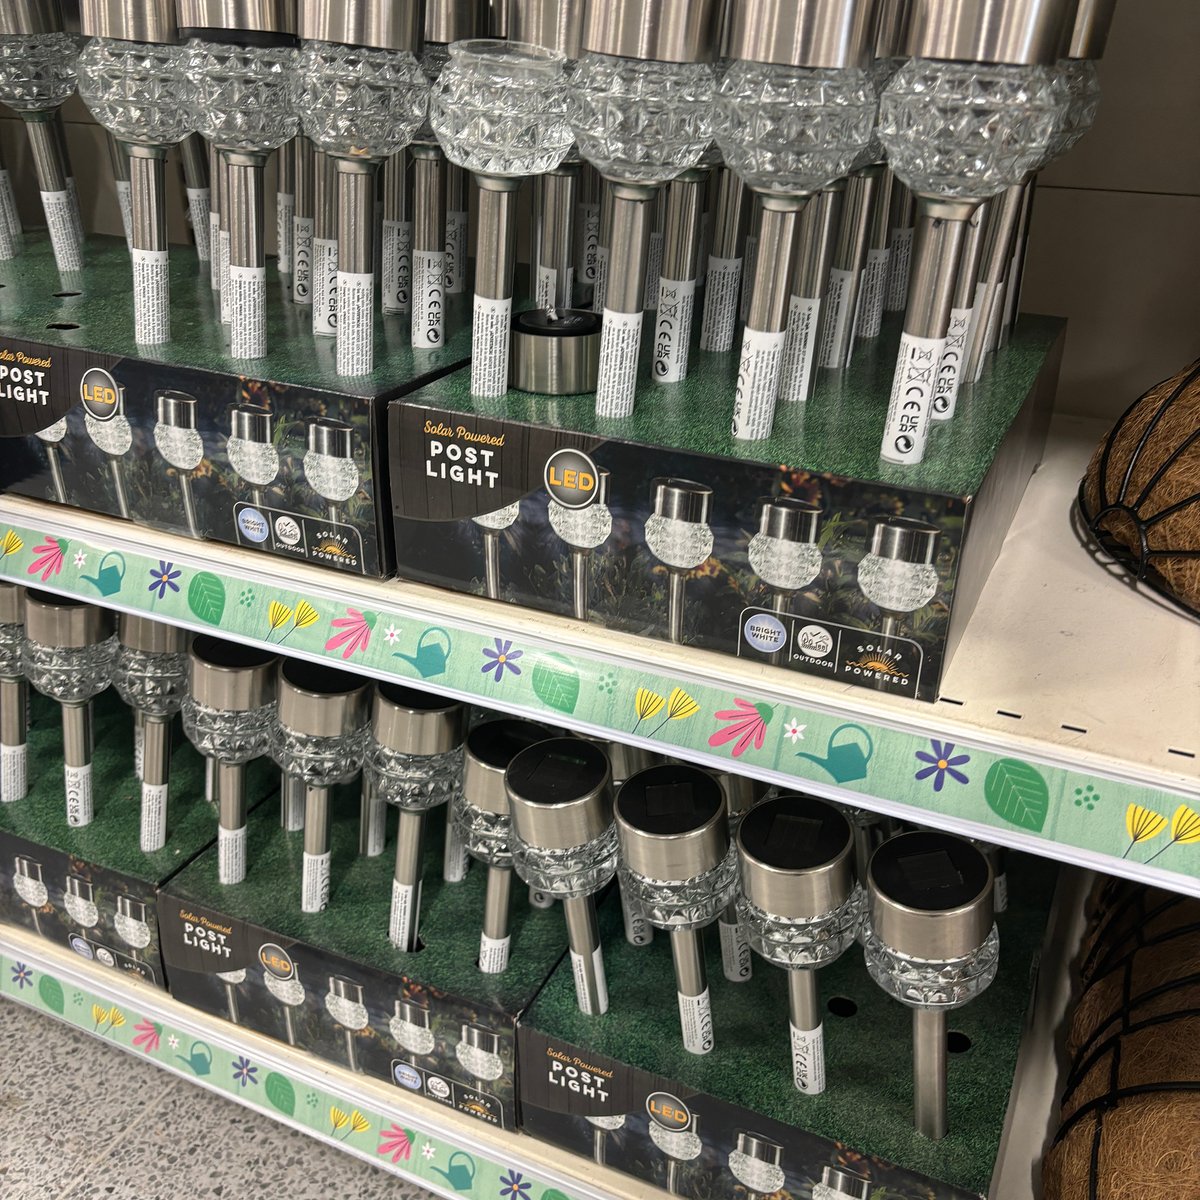 Get your garden Spring ready at Poundland with their new range of garden products available at their new high street store 🌷 #Poundland #Spring #Garden #BelfryShopping